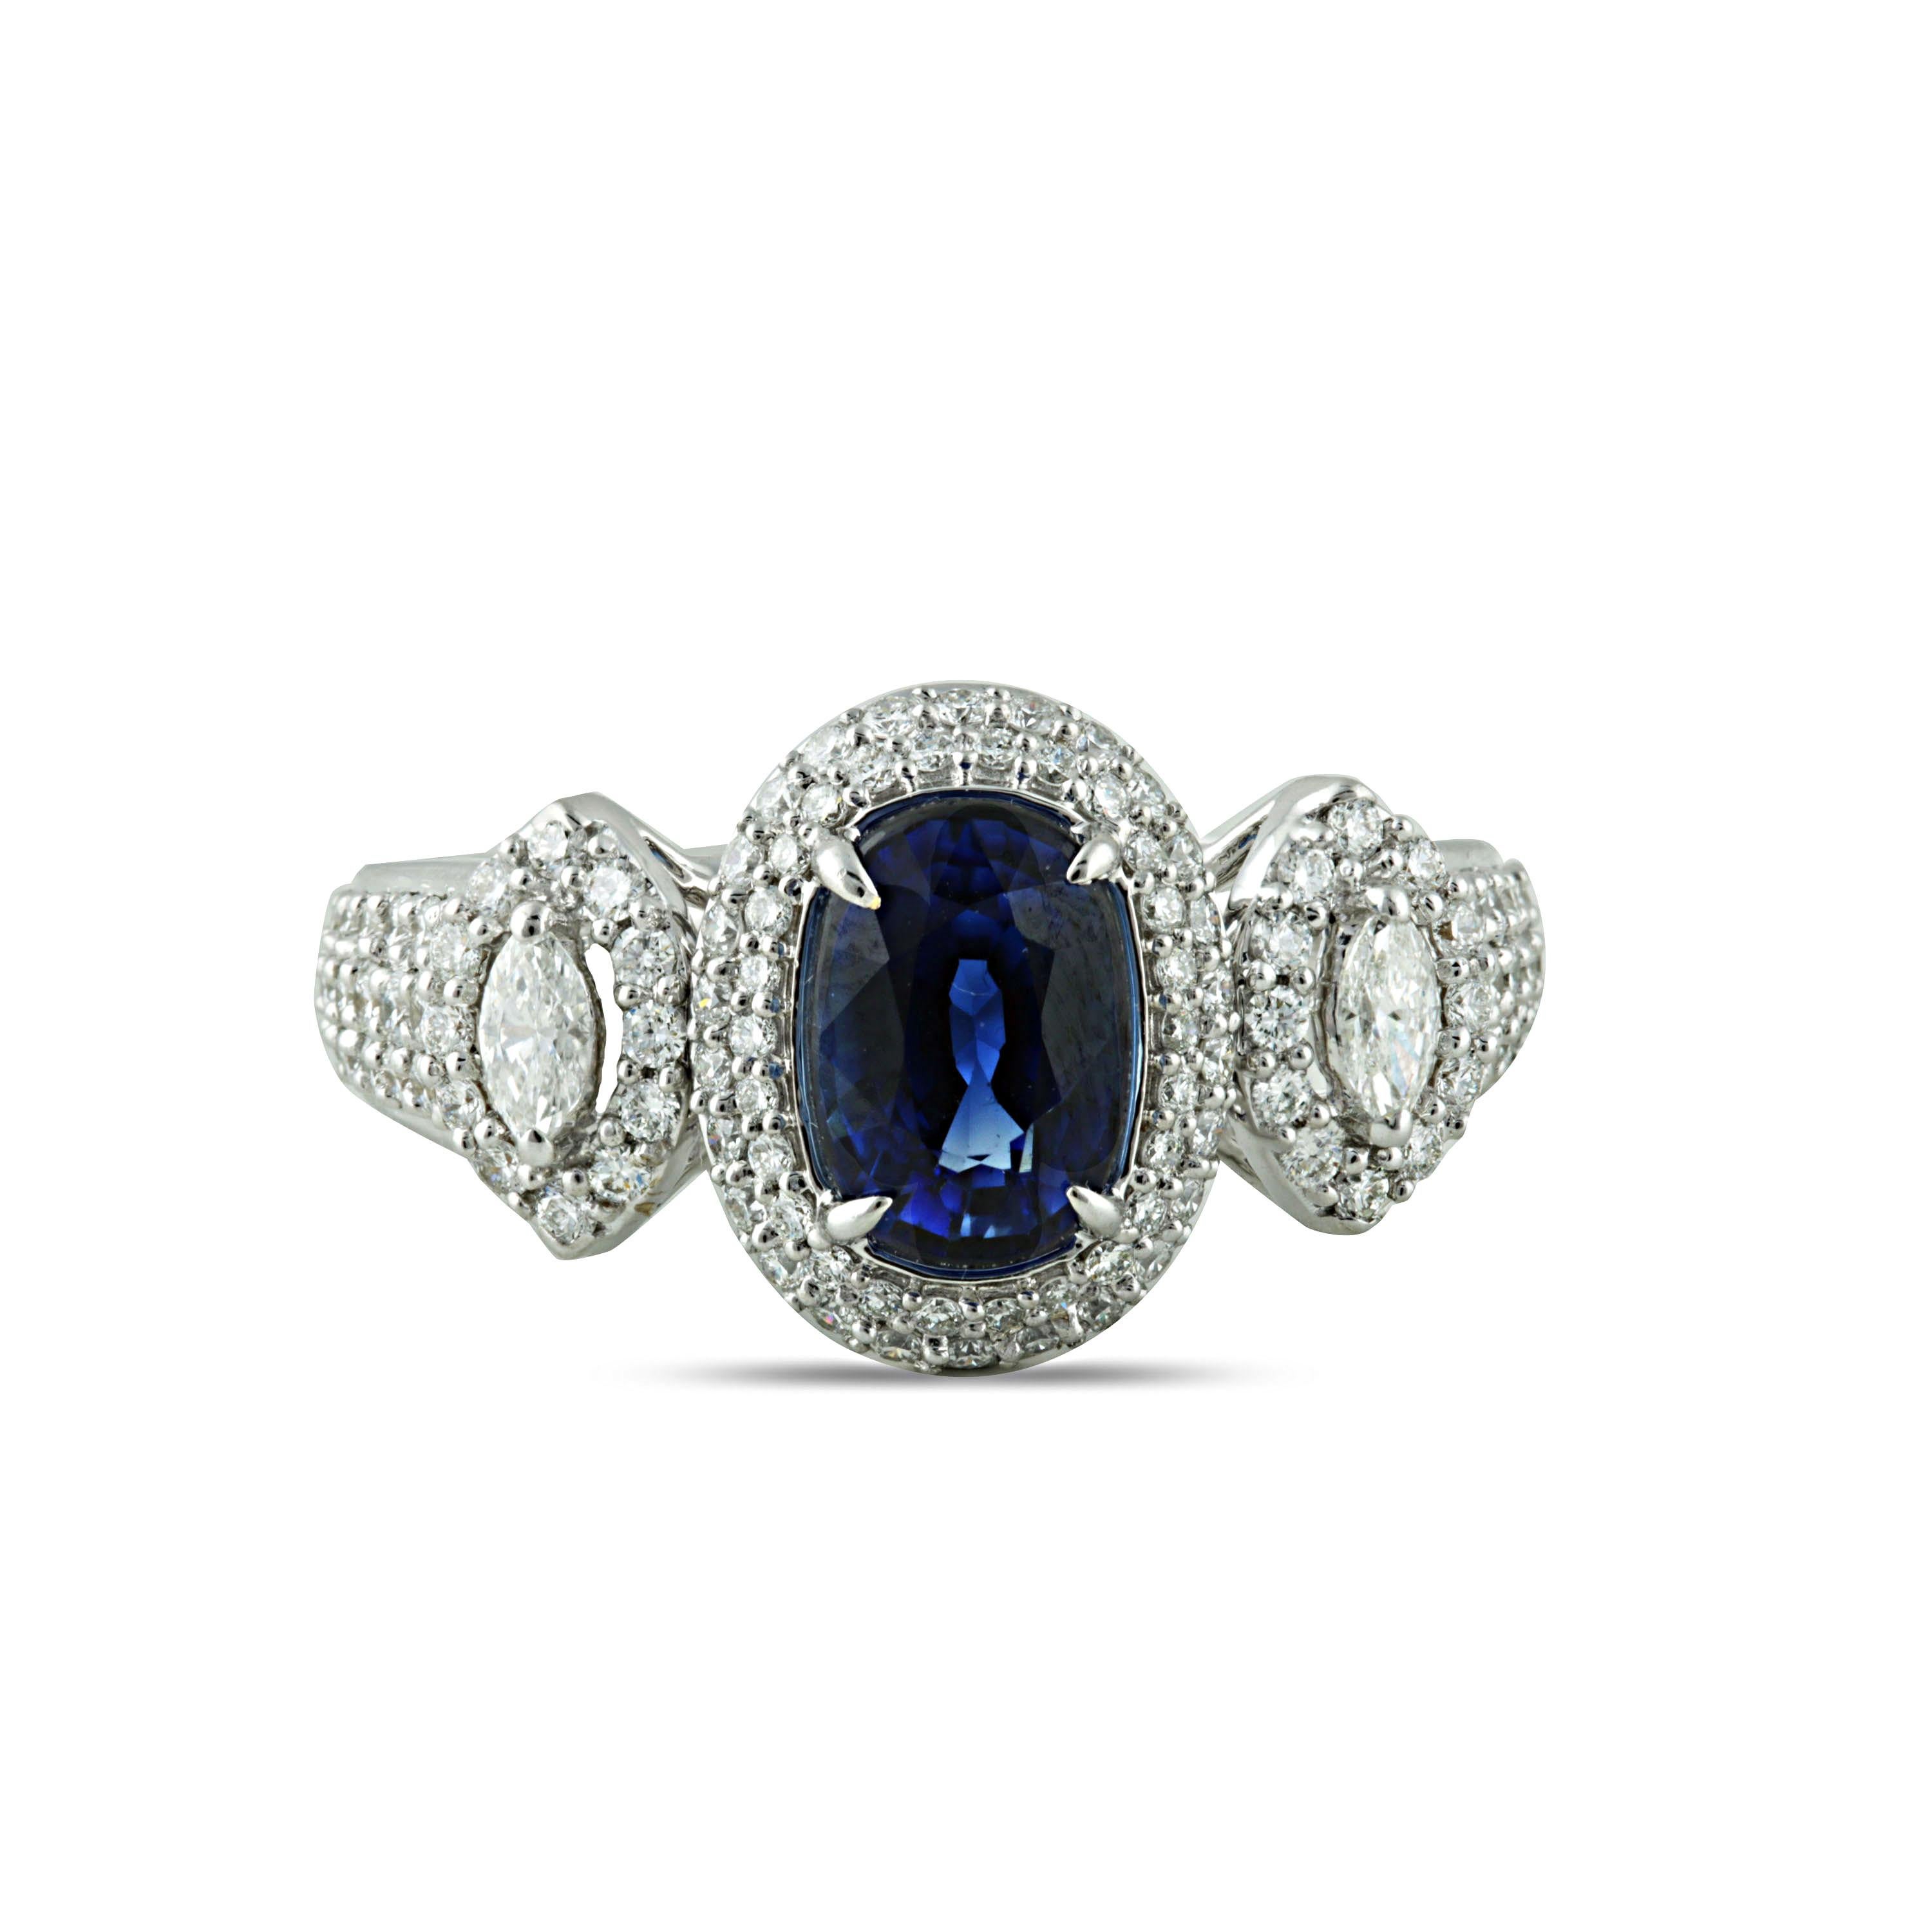 Blue sapphire and diamond ring

A classic style is given a modern twist in this 18K white gold ring studded with blue sapphire and marquise brilliant and round brilliant cut diamonds set in a prong setting. Featuring 123 stones, this ring will